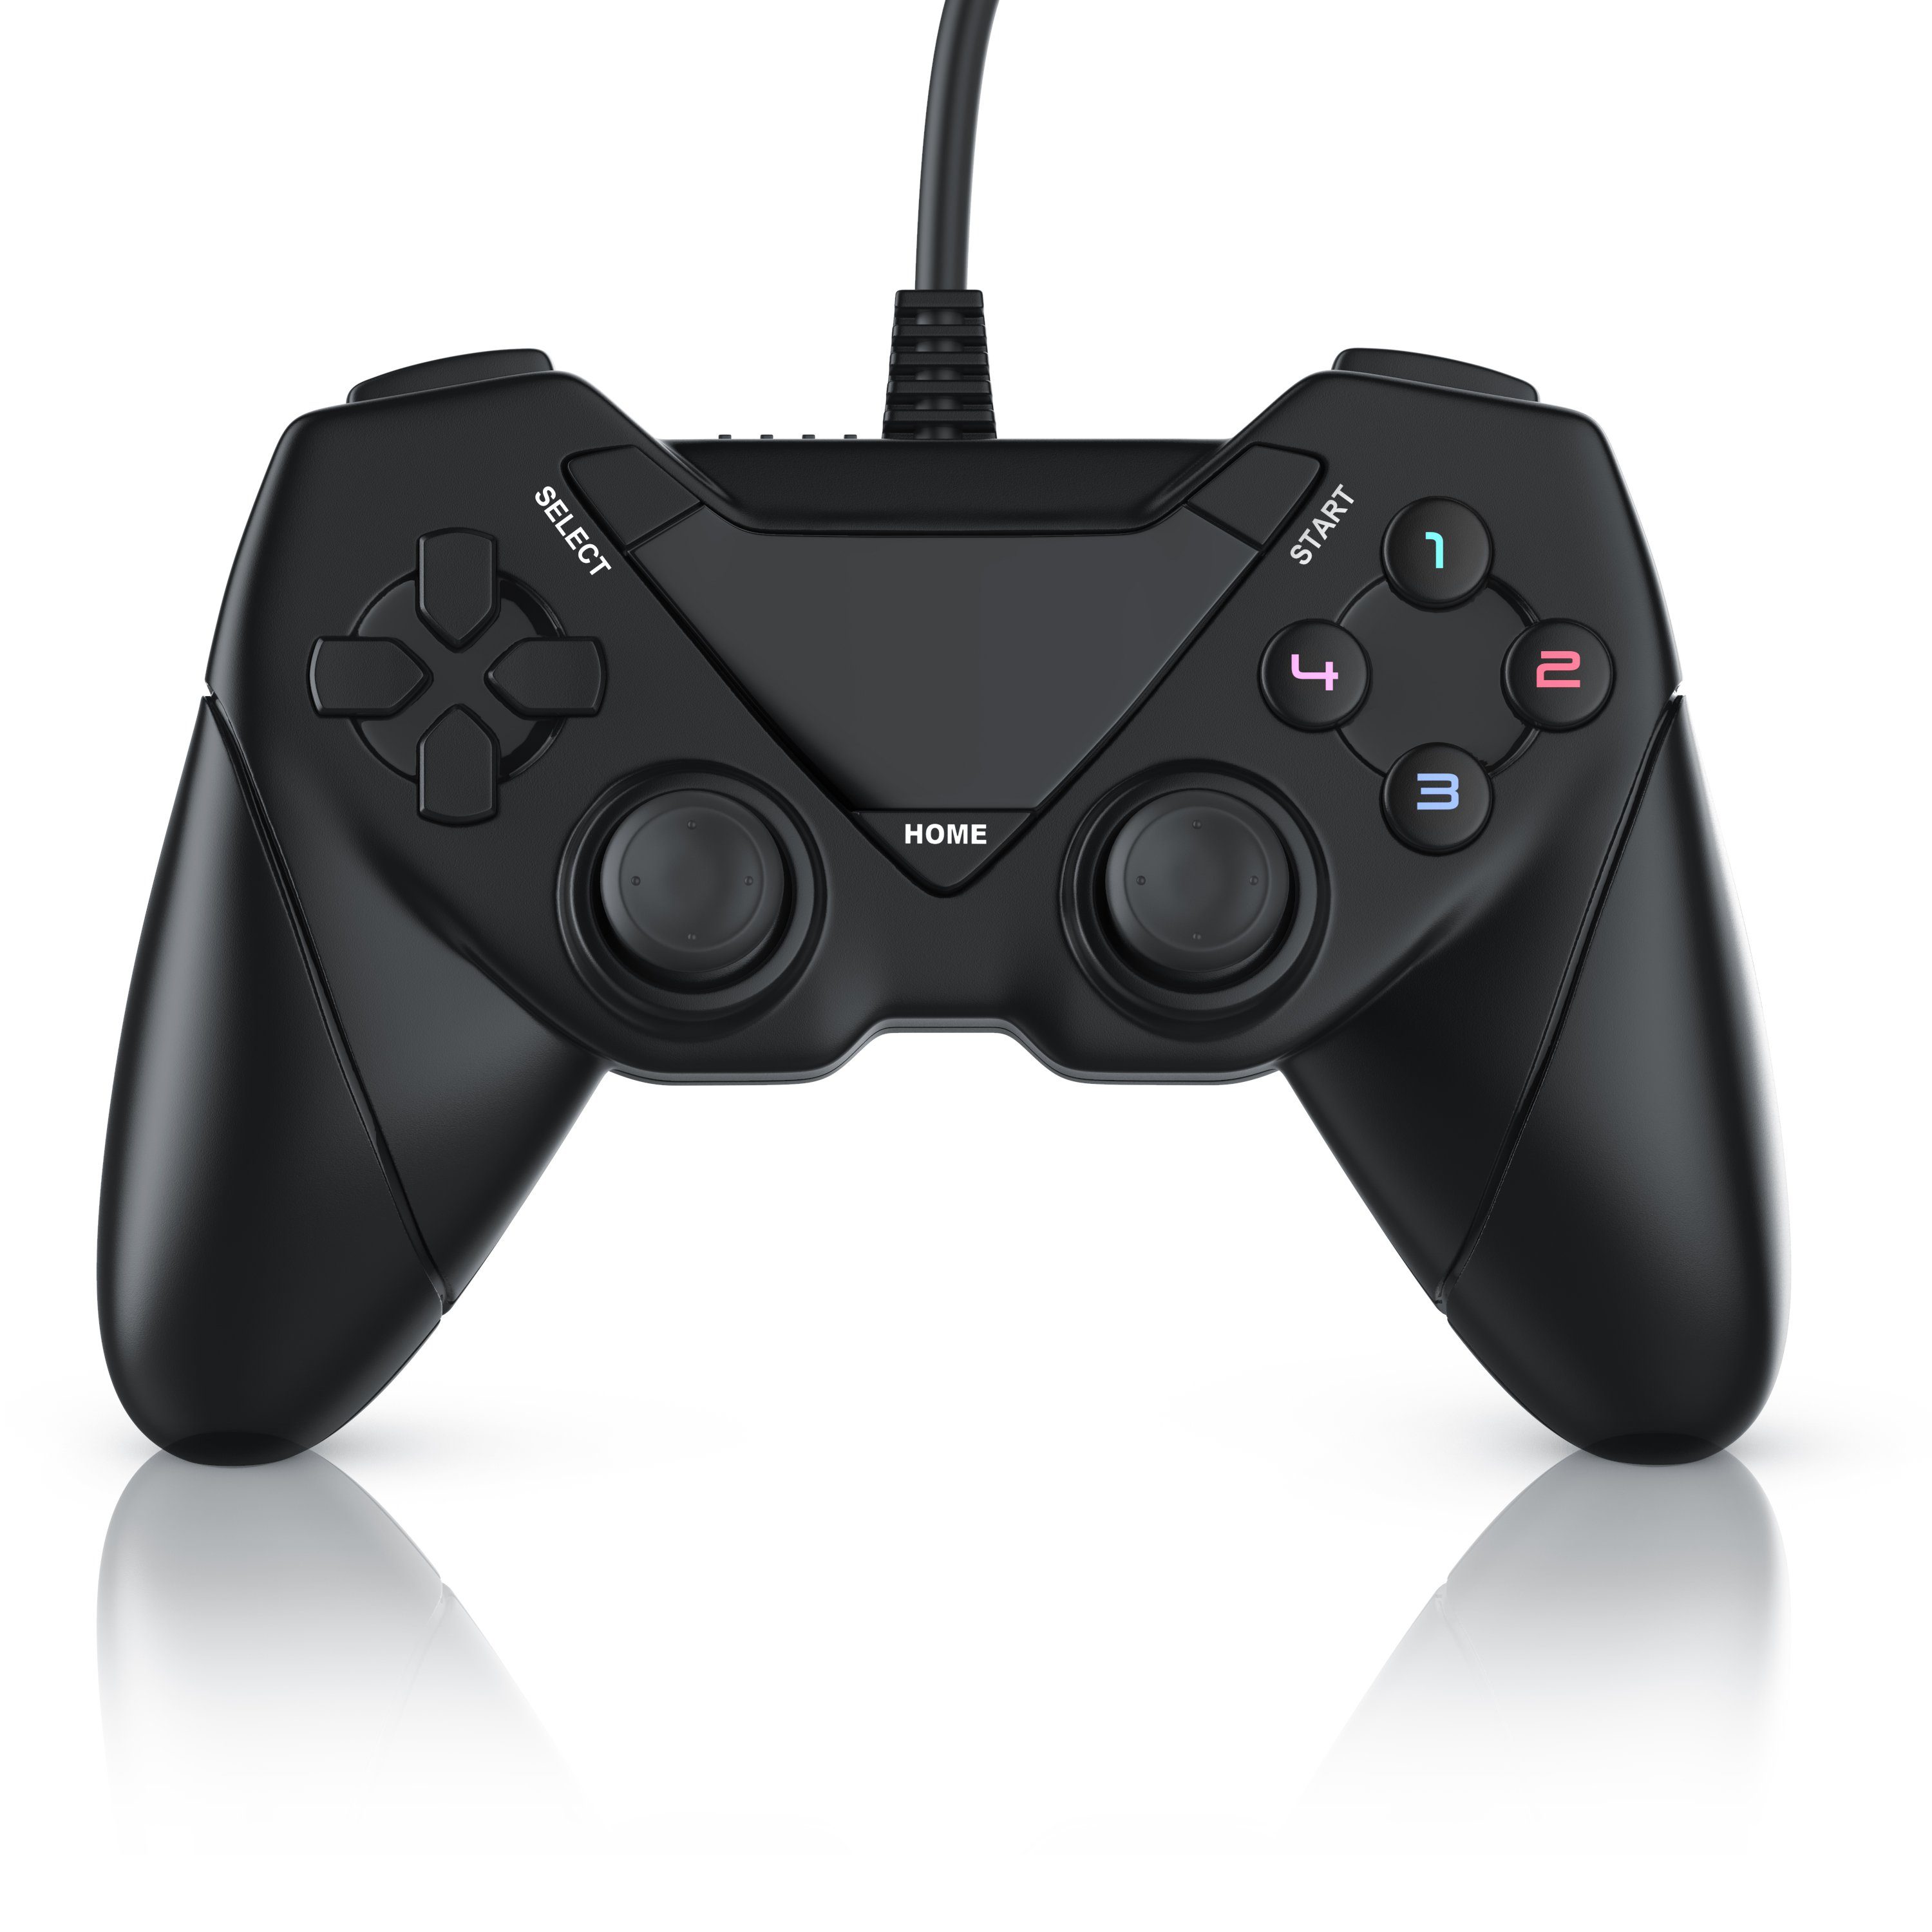 / USB / PC CSL PlayStation-Controller (1 Direct-Input X-Input) für St., / PS3 Controller Android,